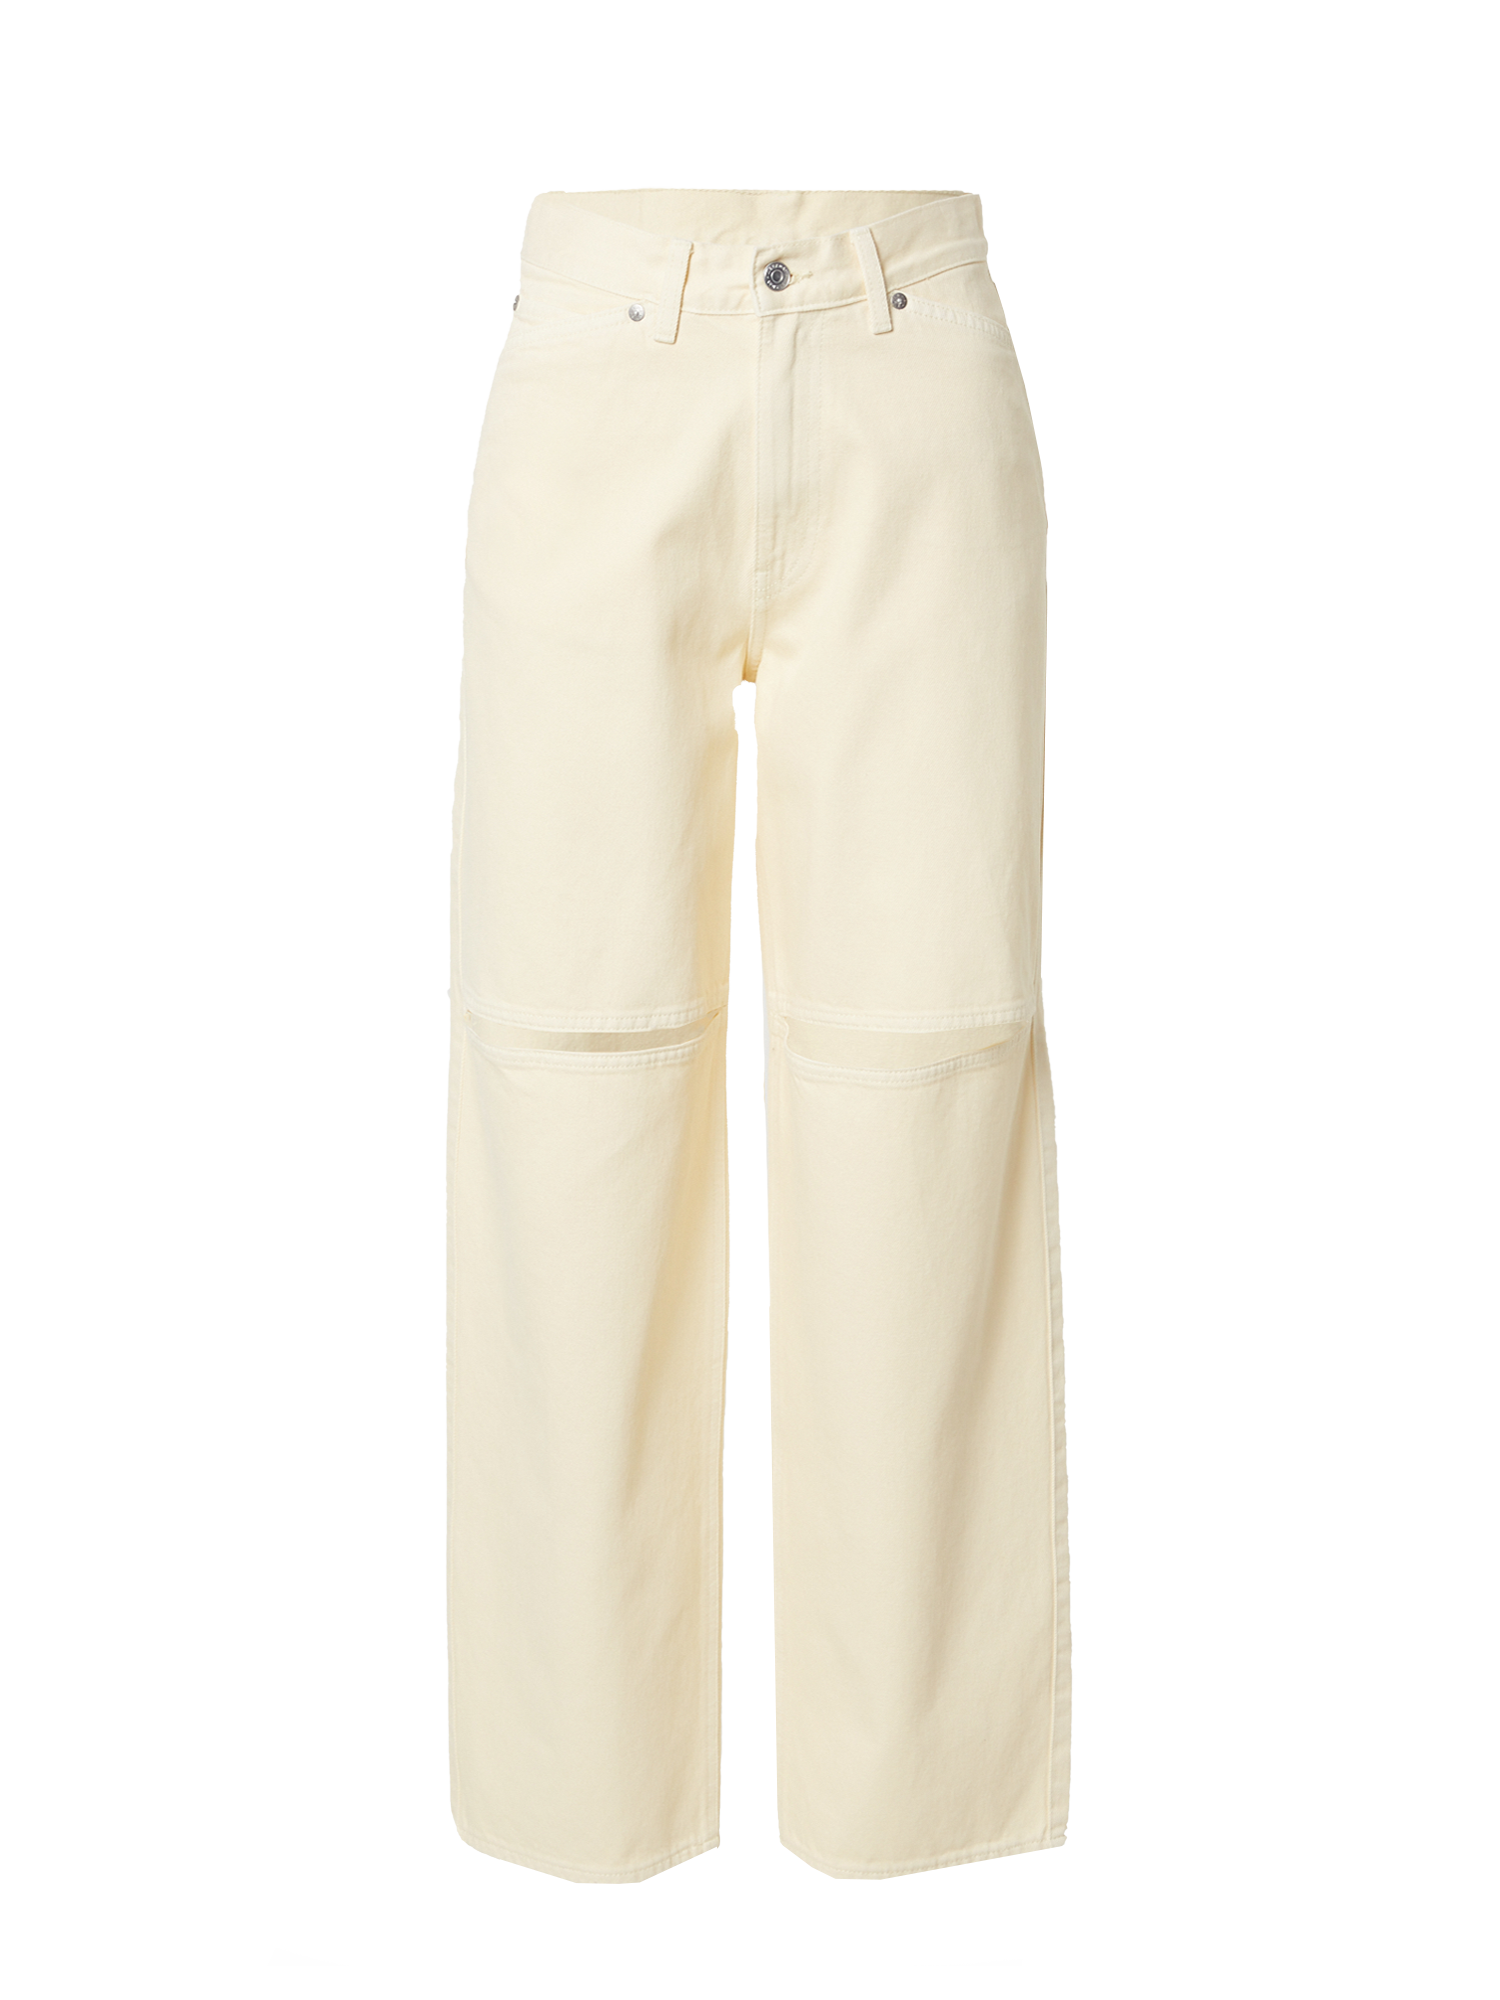 WEEKDAY Jeans Brae in Bianco Naturale 